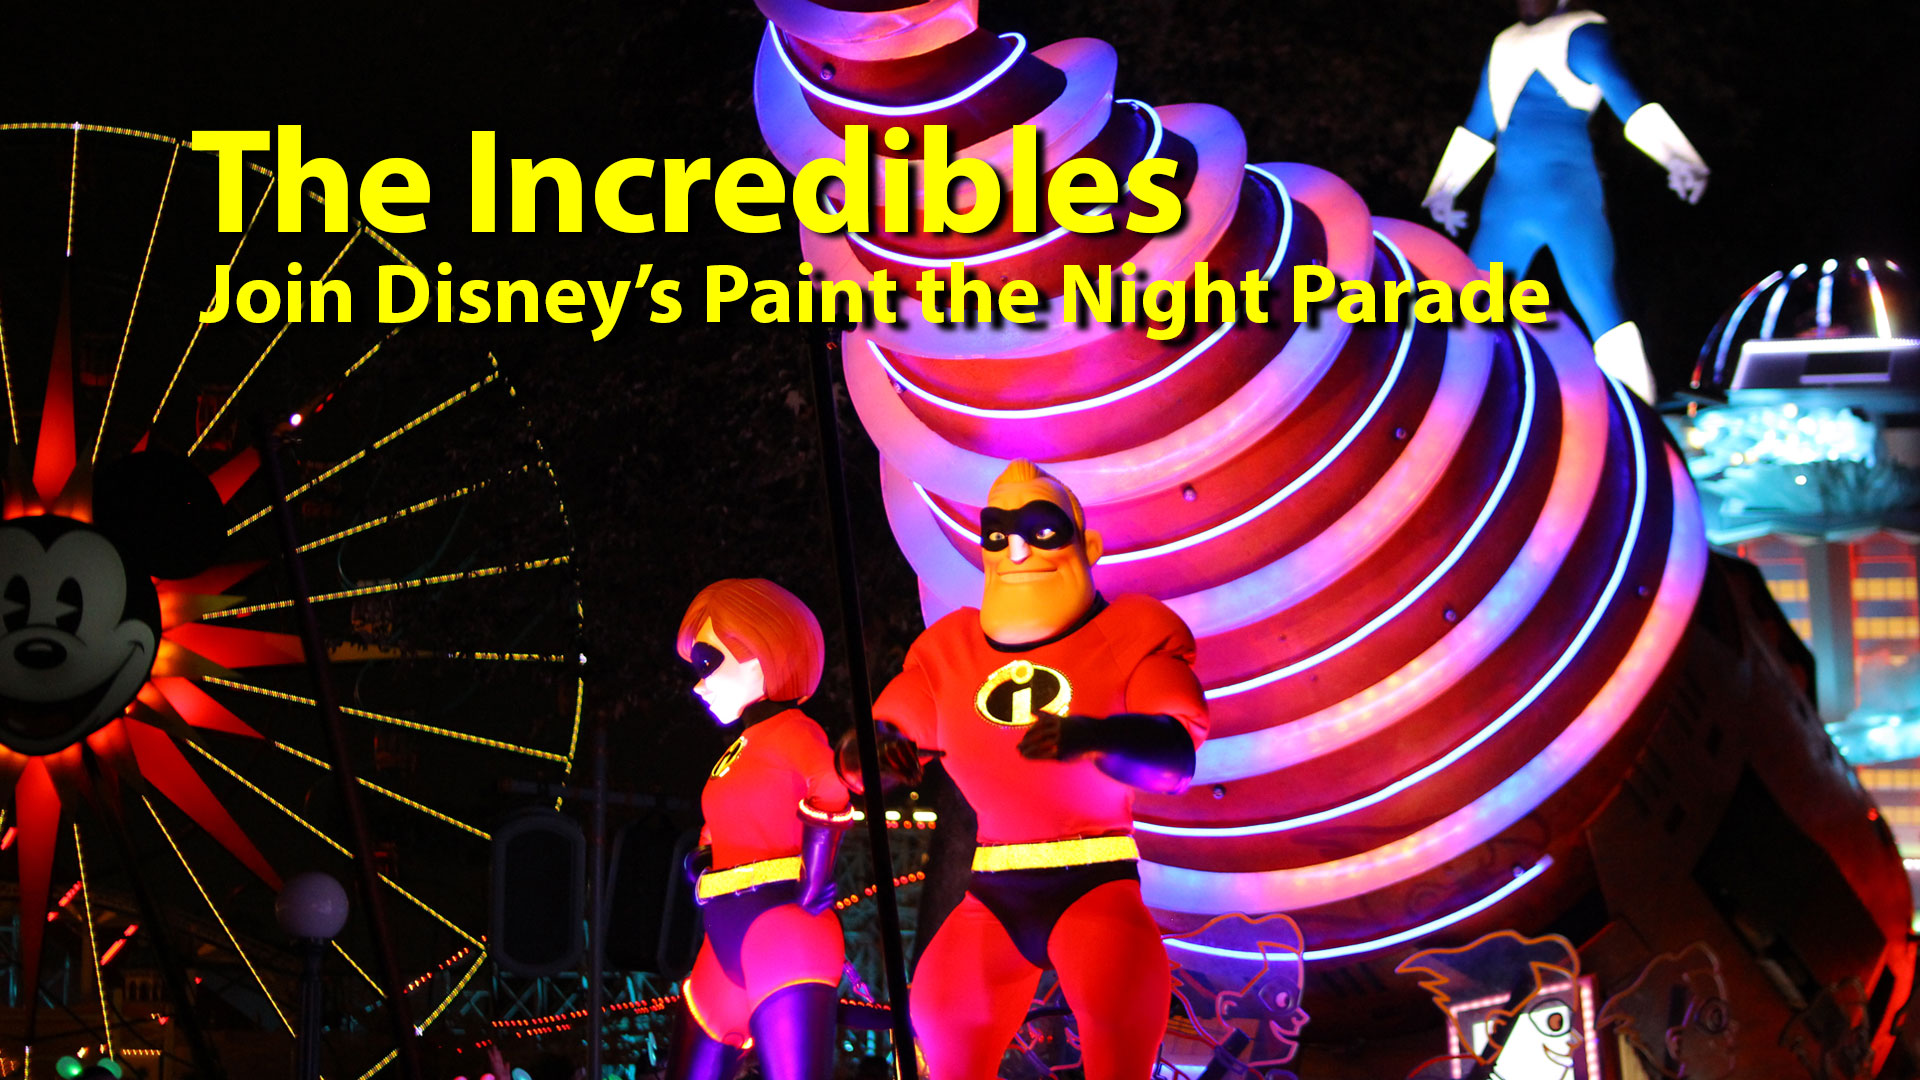 Disney’s Paint the Night Parade Gets Even More Incredible With Pixar Pier Opening!